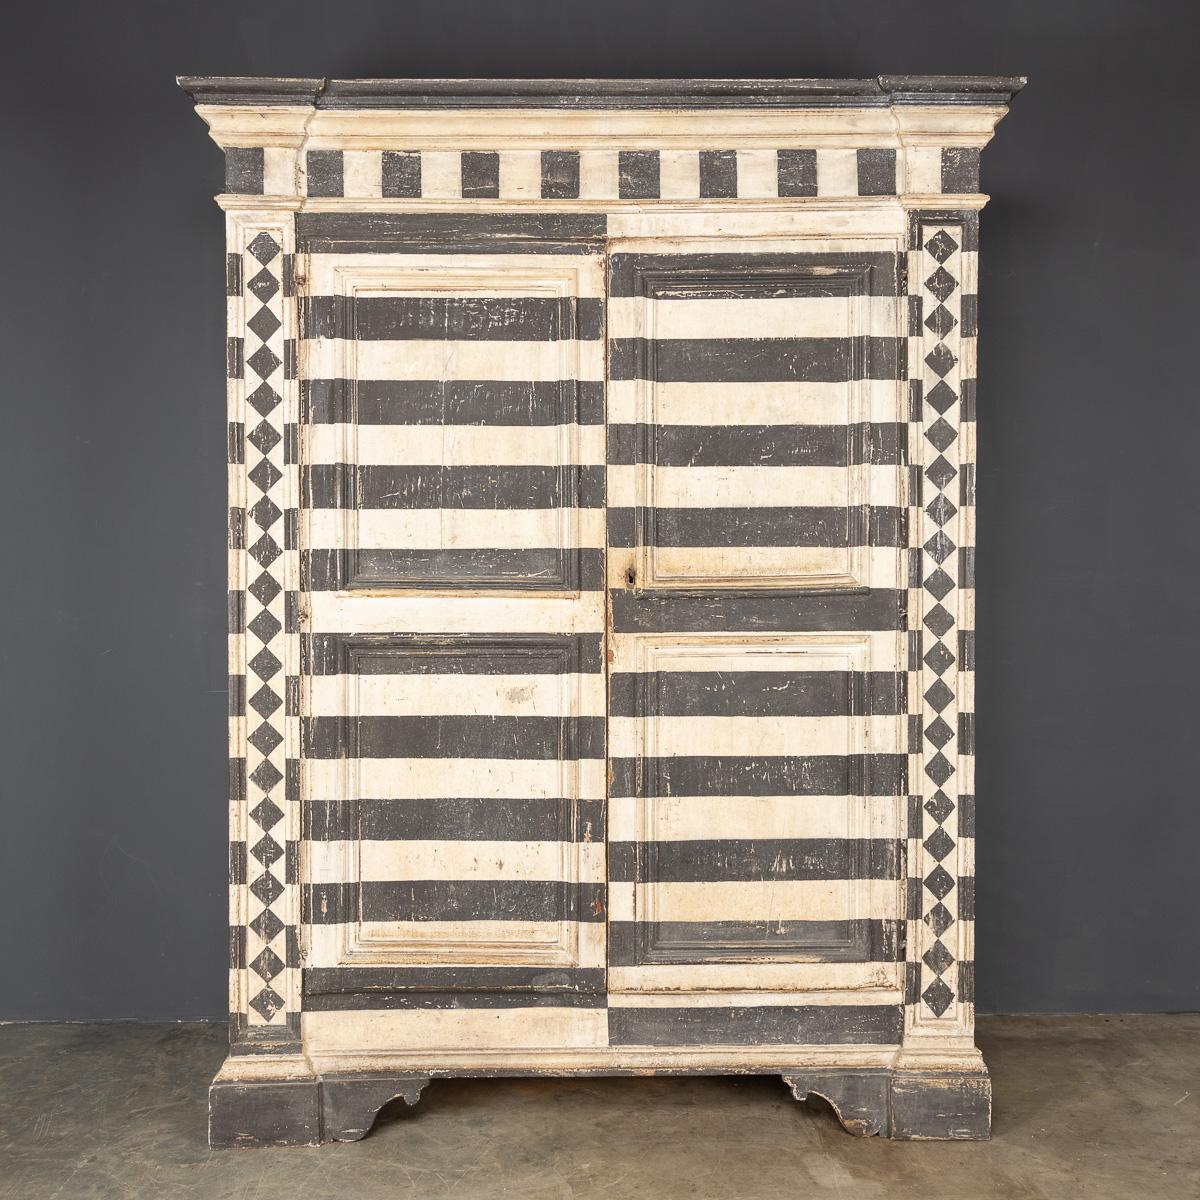 Antique mid-19th Century Italian beautiful and rustic painted pine armoire, decorated with a decorative pattern in white and grey, has its original lock and key. 

CONDITION
In Good Condition - Wear as expected.

SIZE
Width: 157cm
Depth: